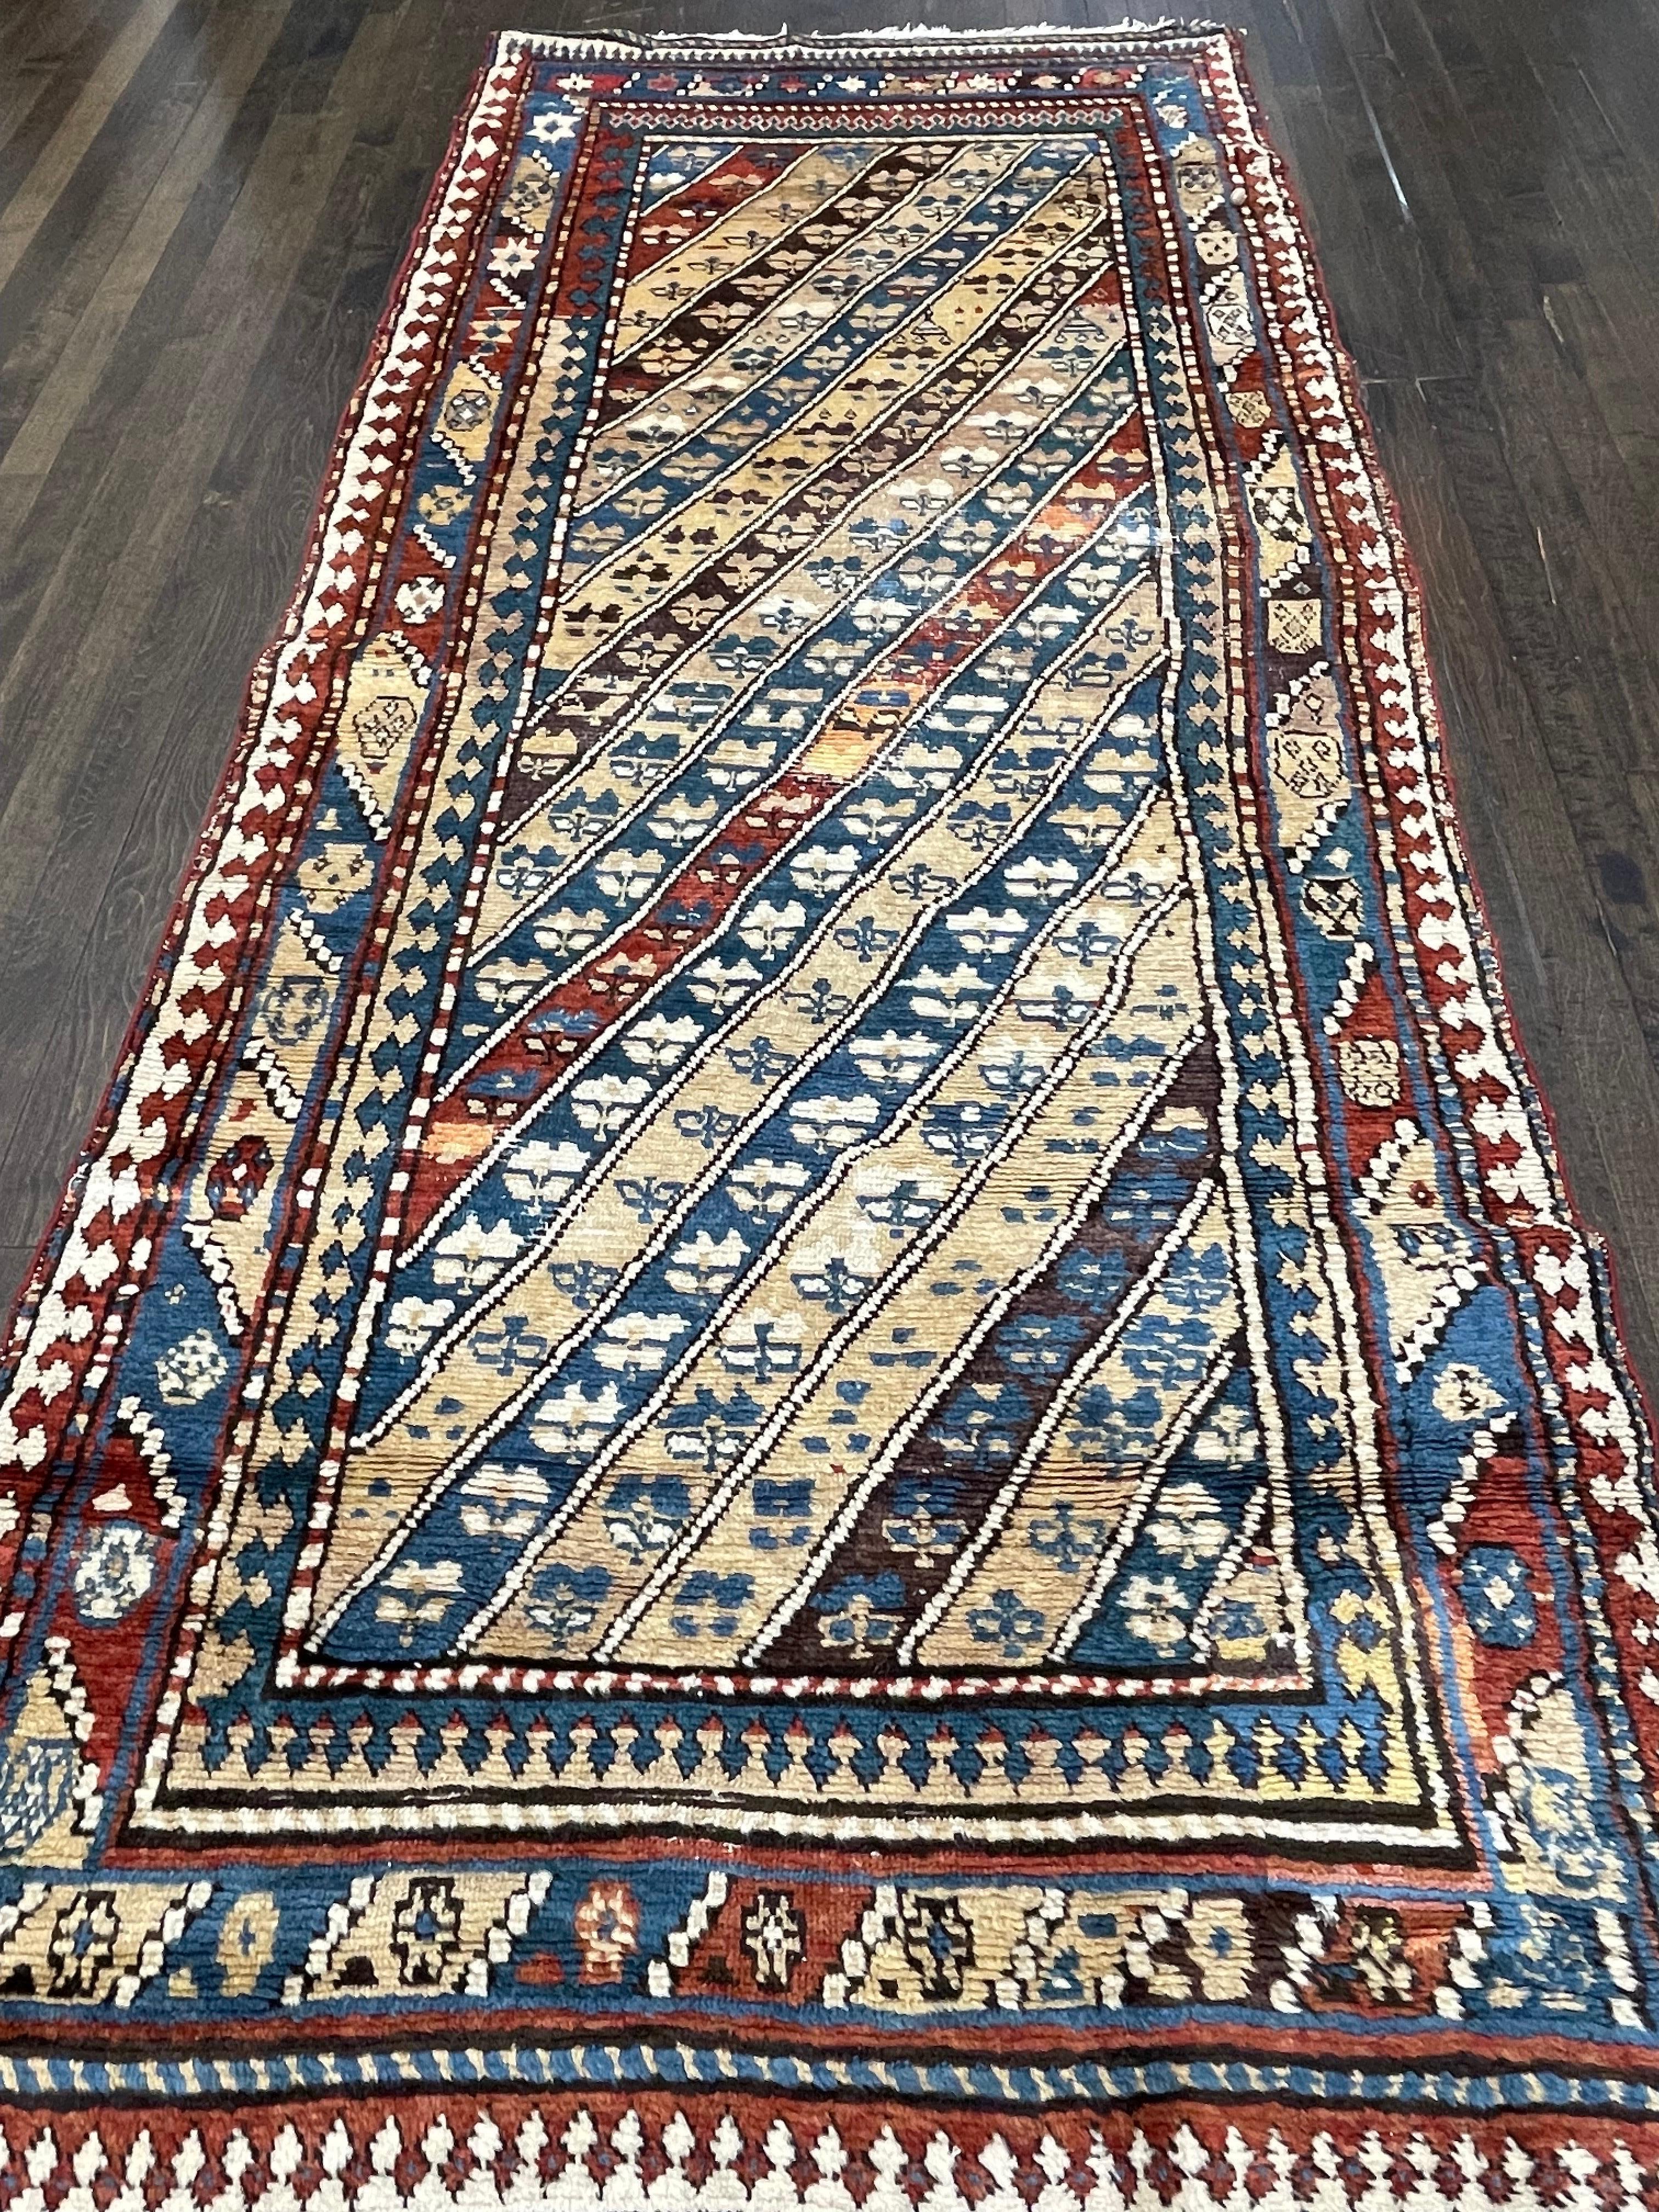 A beautiful runner attributed to Gendje, Azerbaijan, south central caucasus that features the signature design of this group: diagonal, contrasting stripes in vibrant vegetable colors, creating a feeling that they simply run out and under the